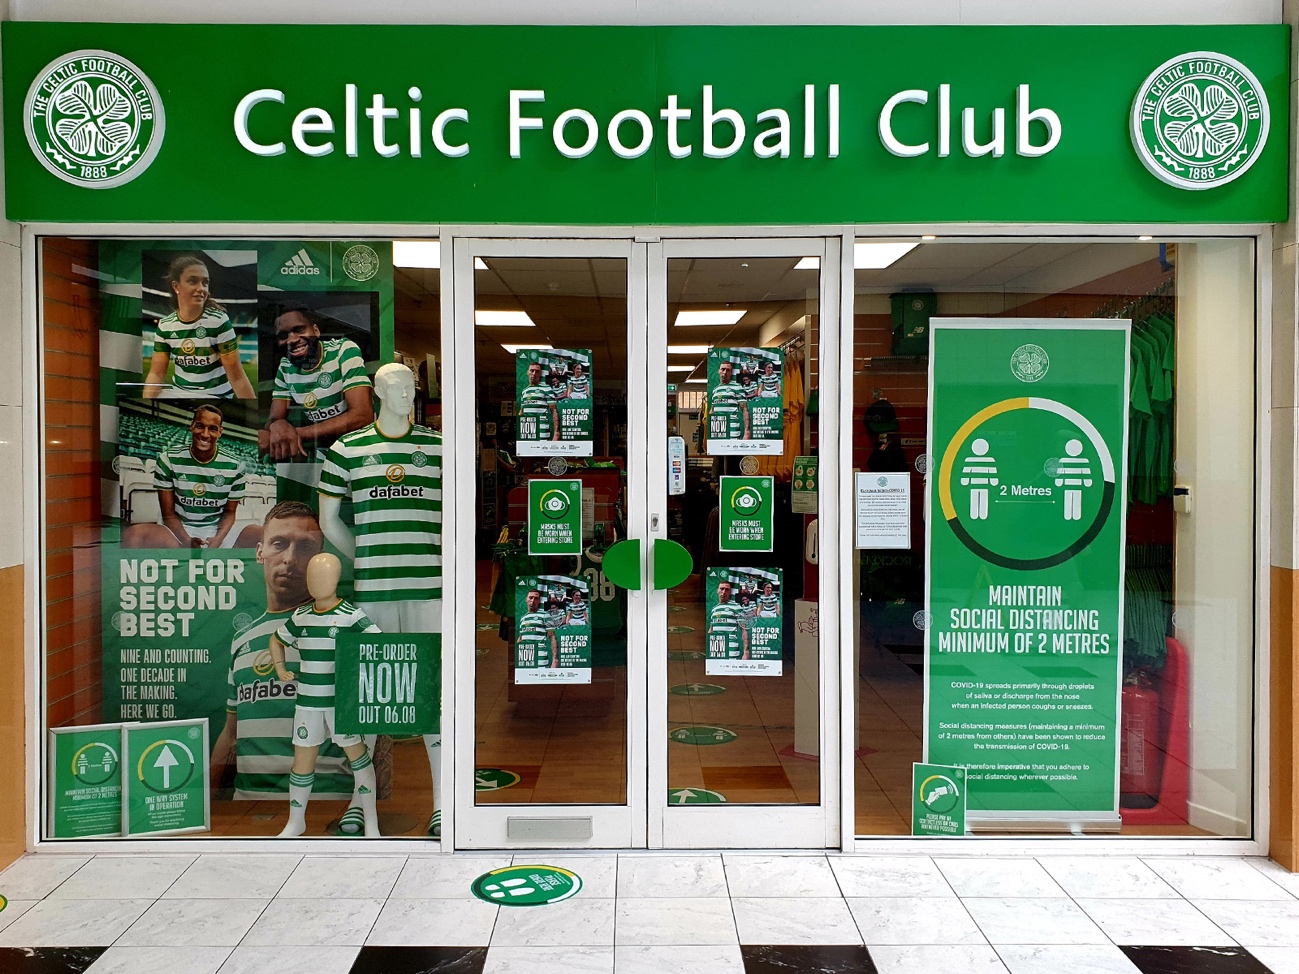 CELTIC FOOTBALL CLUB ANNOUNCES IN-STADIUM BETTING PARTNERSHIP WITH WILLIAM HILL